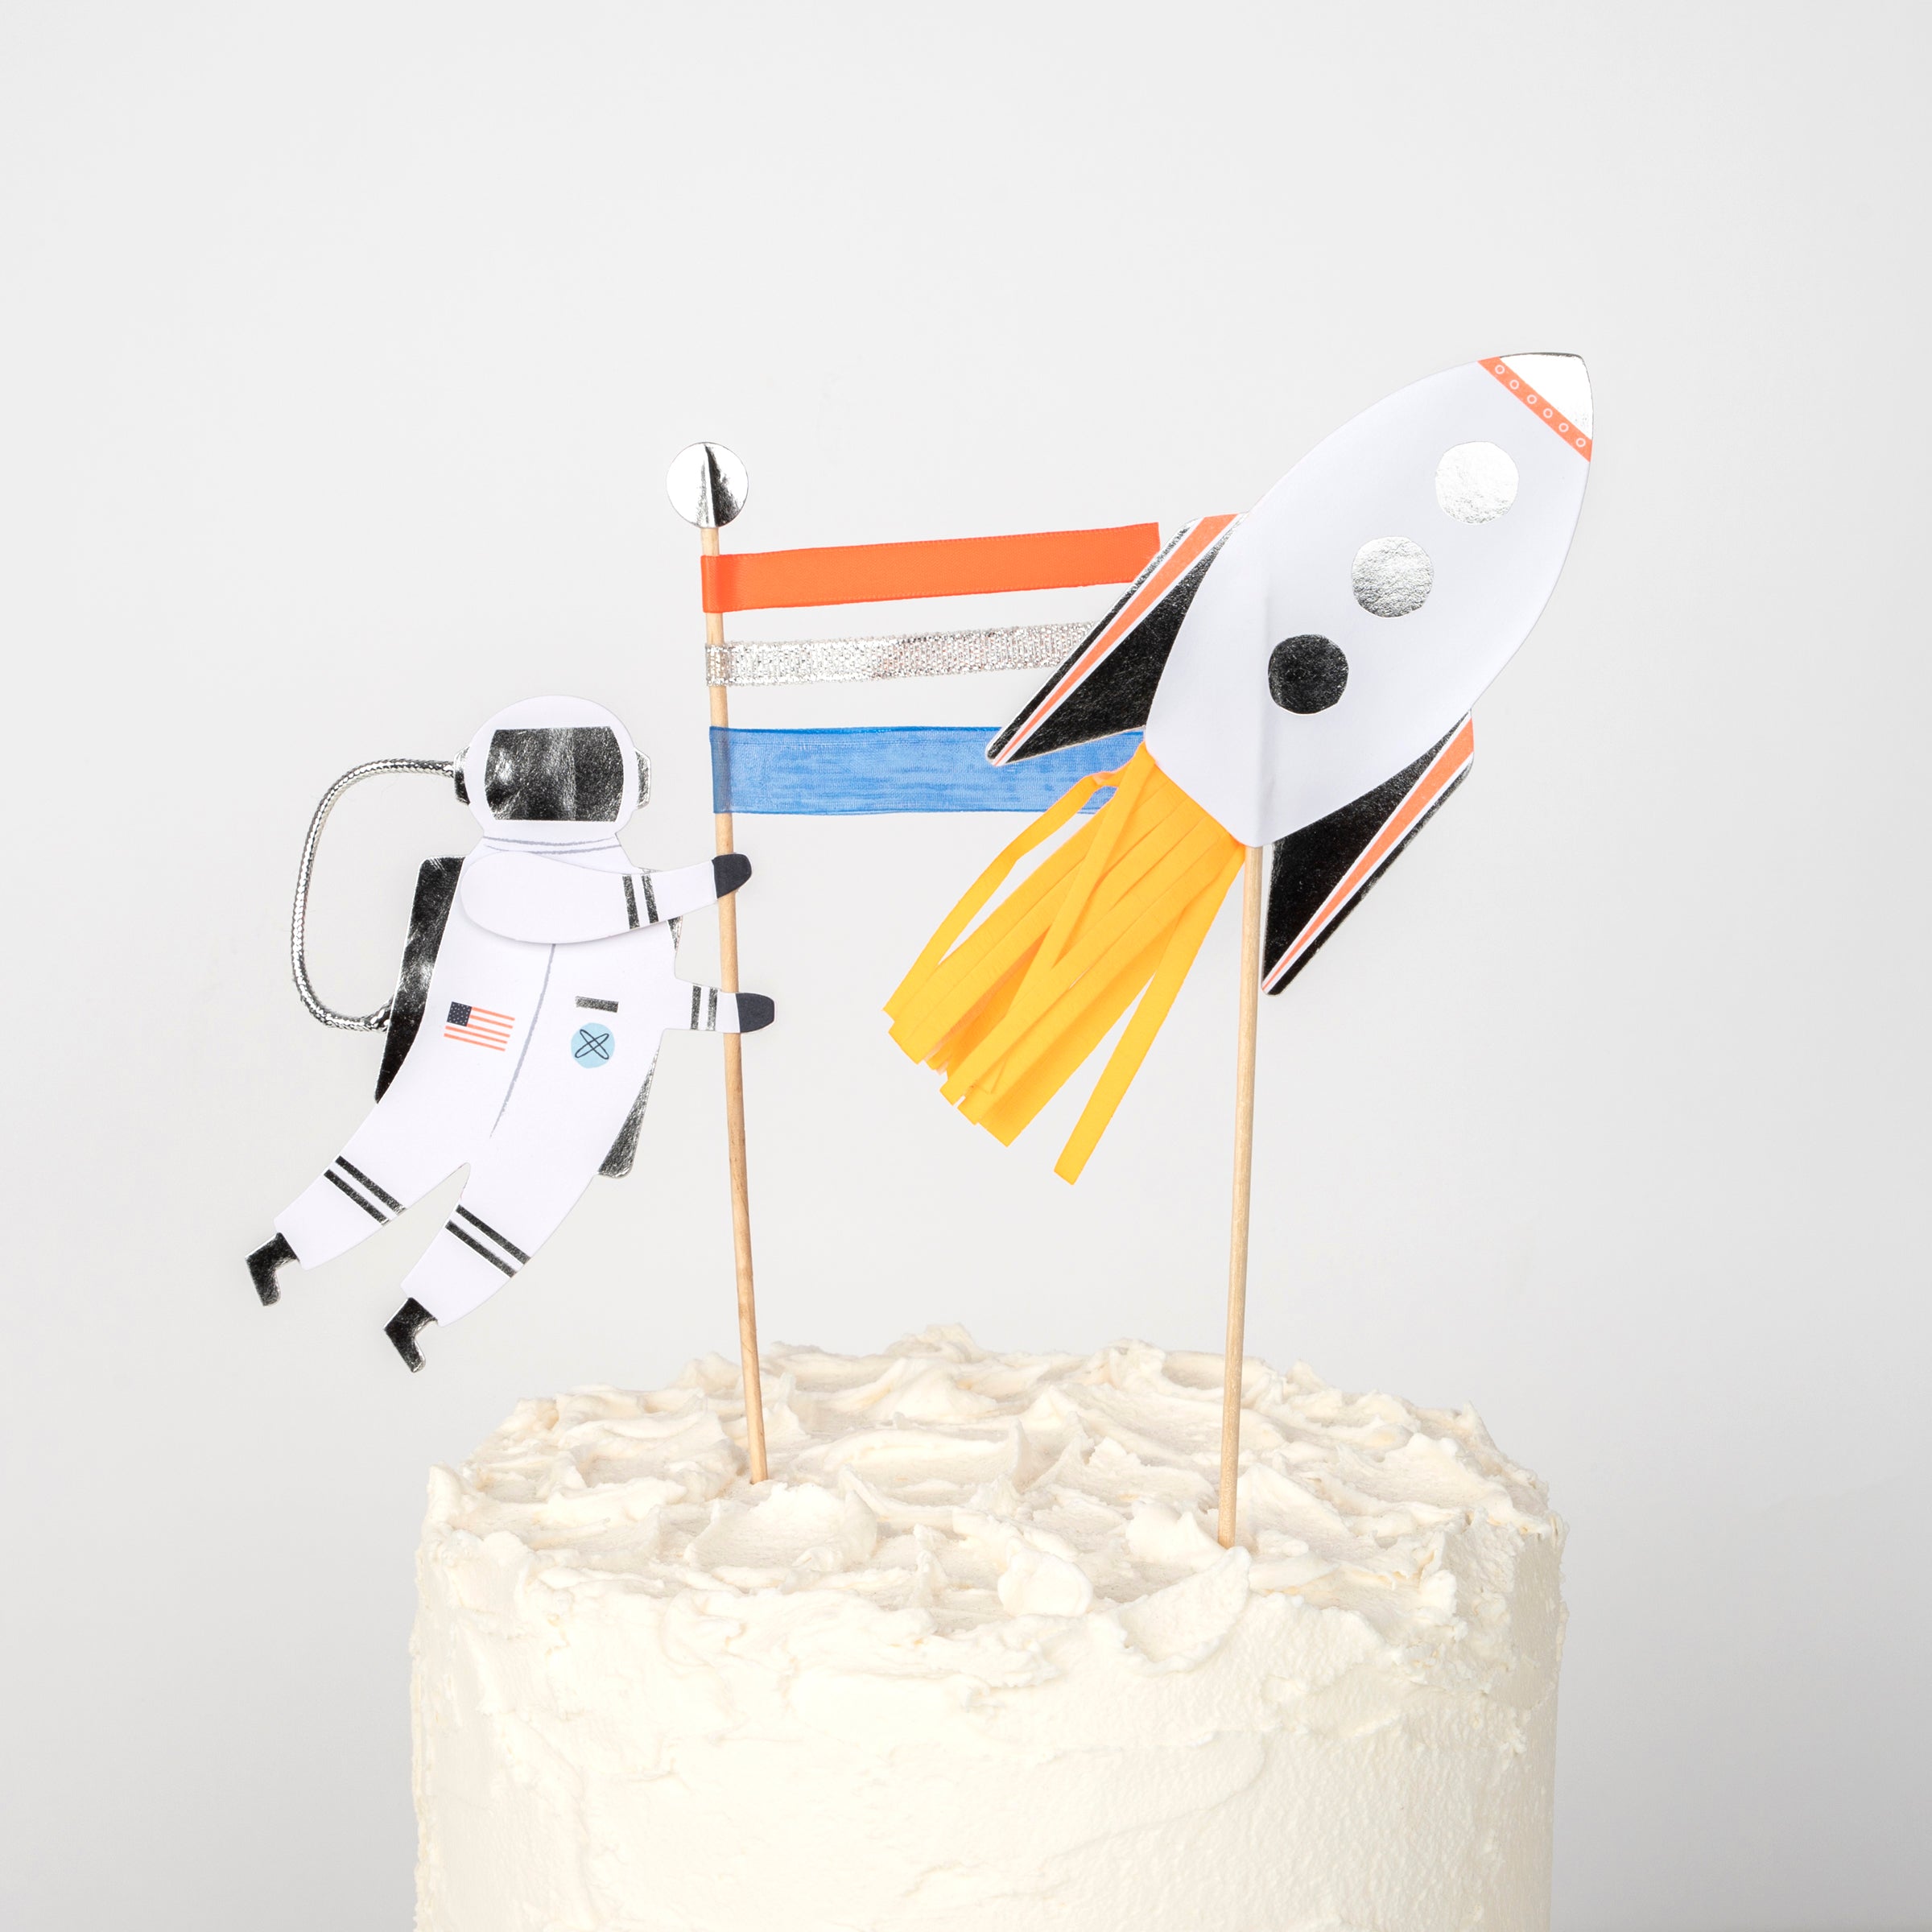 If you're looking for a cake topper for your space birthday party, then you'll love our cake decoration.